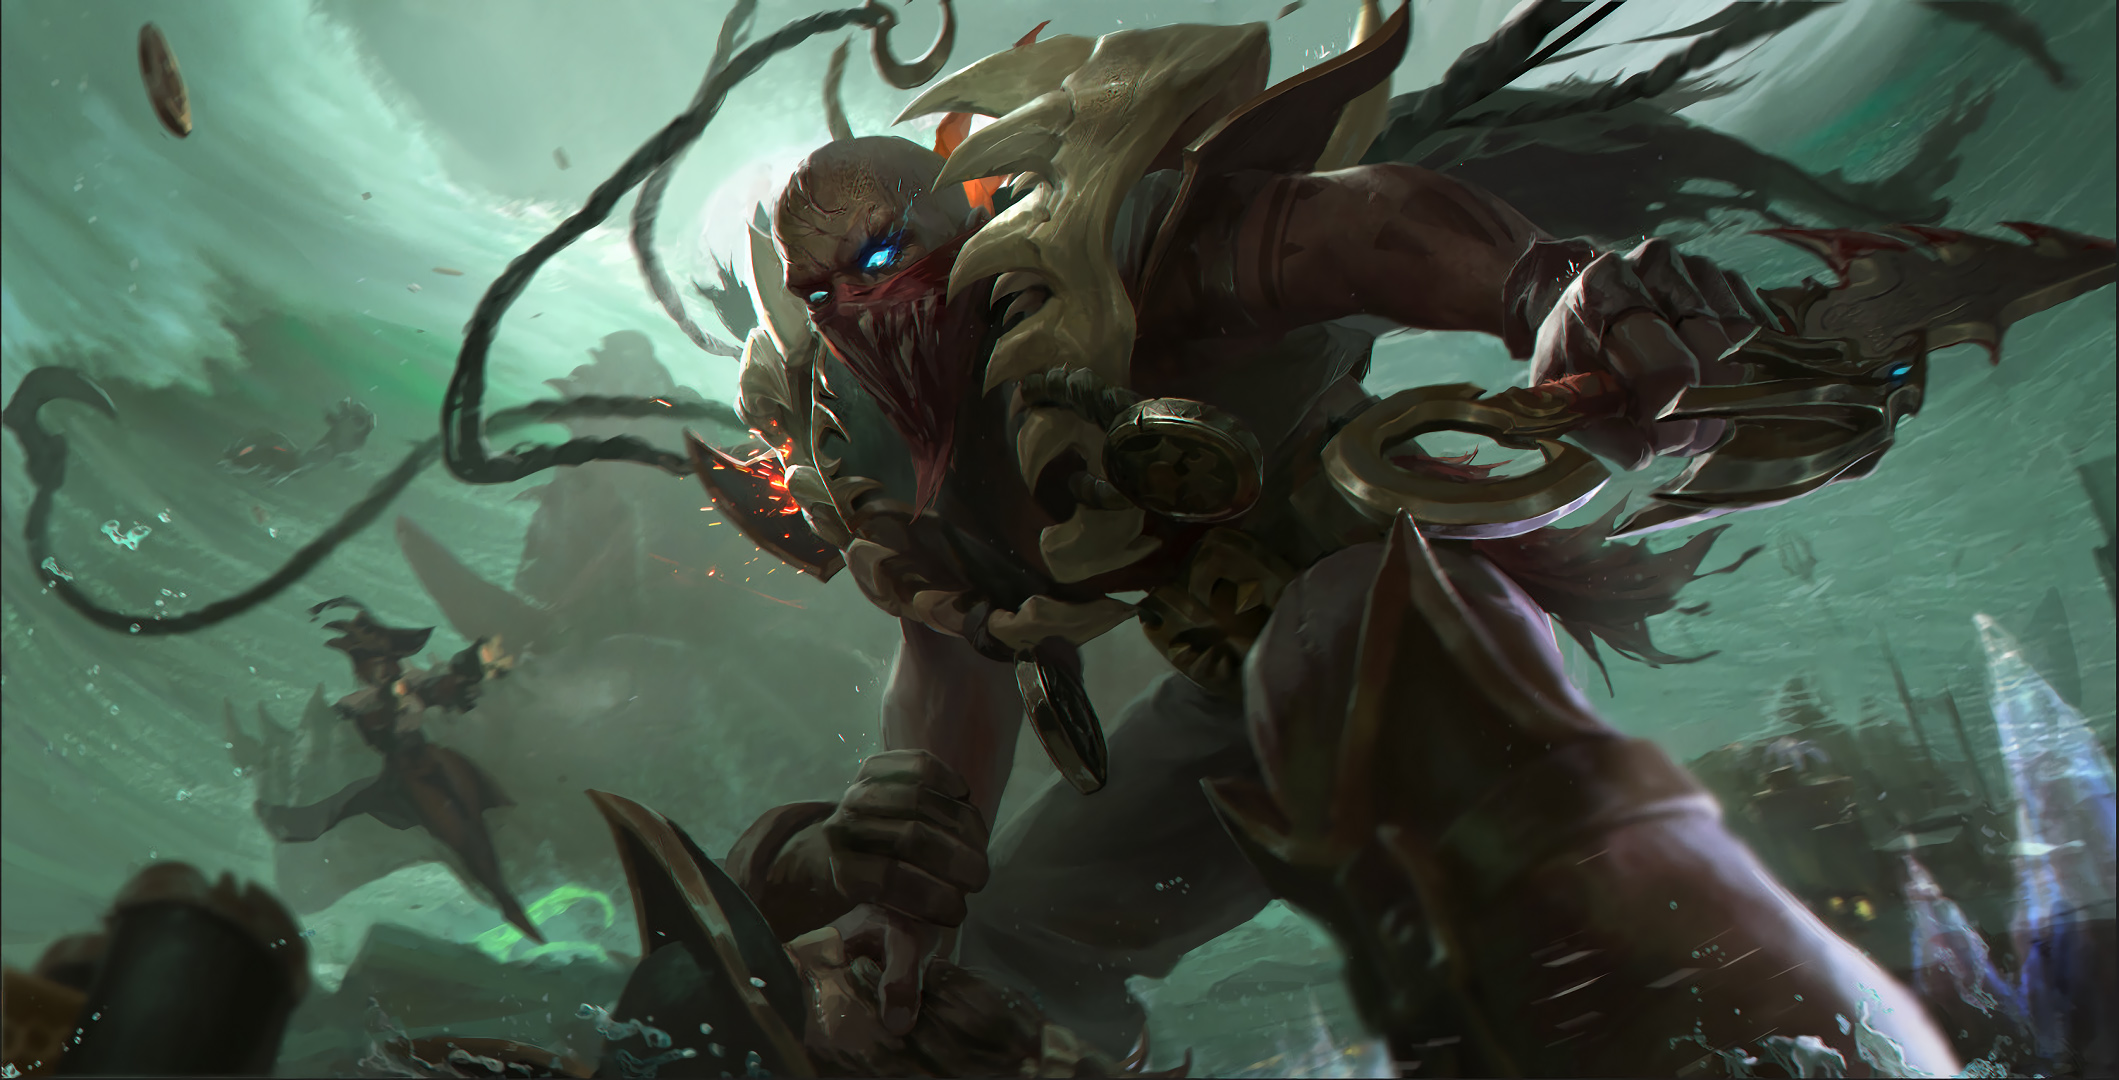 20 Pyke (League Of Legends) HD Wallpapers and Backgrounds. wall.alphacoders...